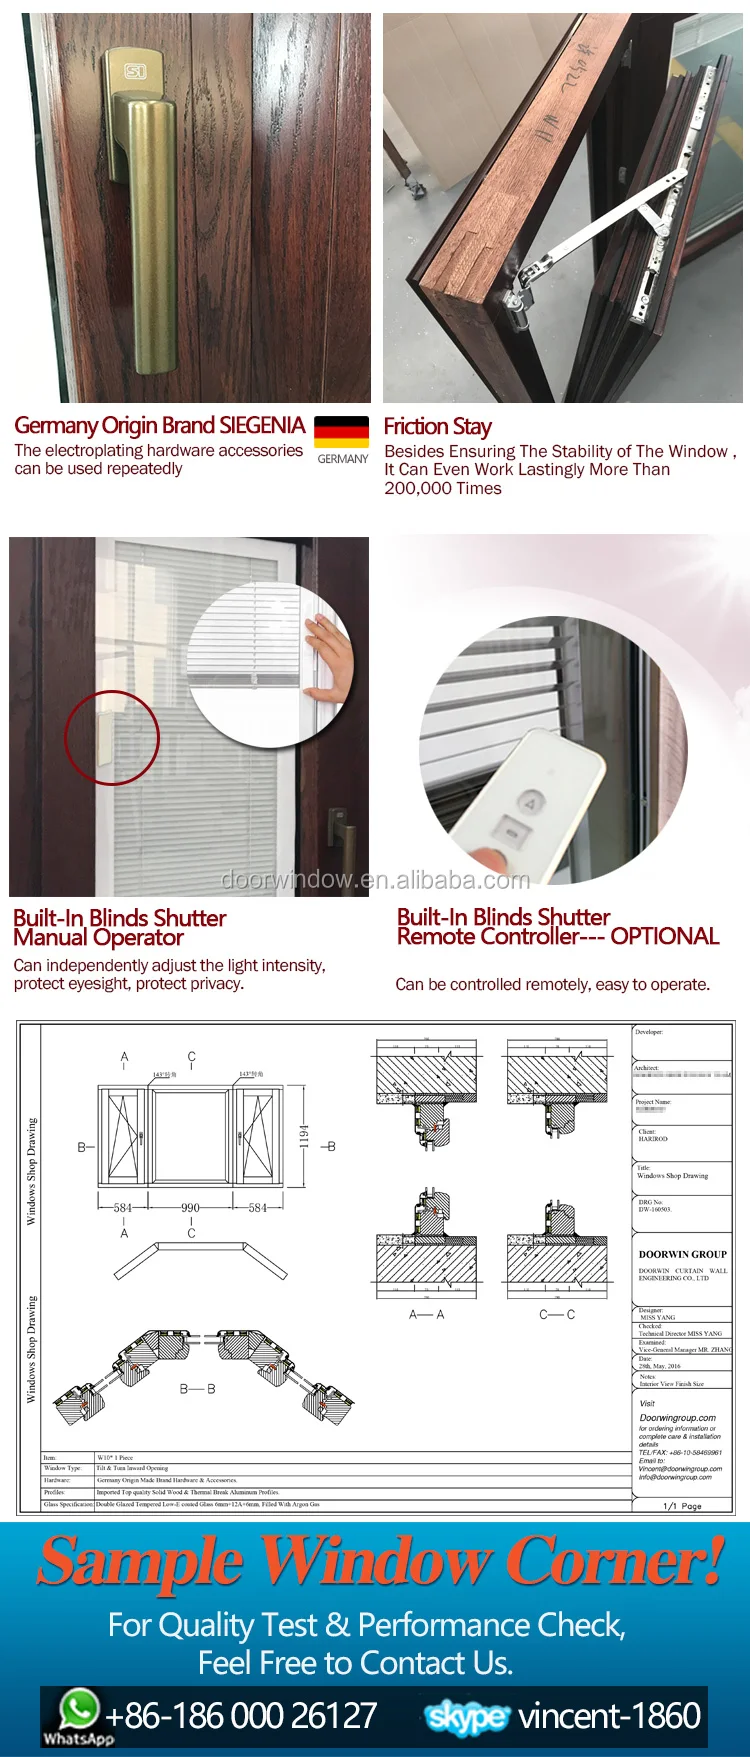 Hot new products windows with built in blinds windows california standard window france